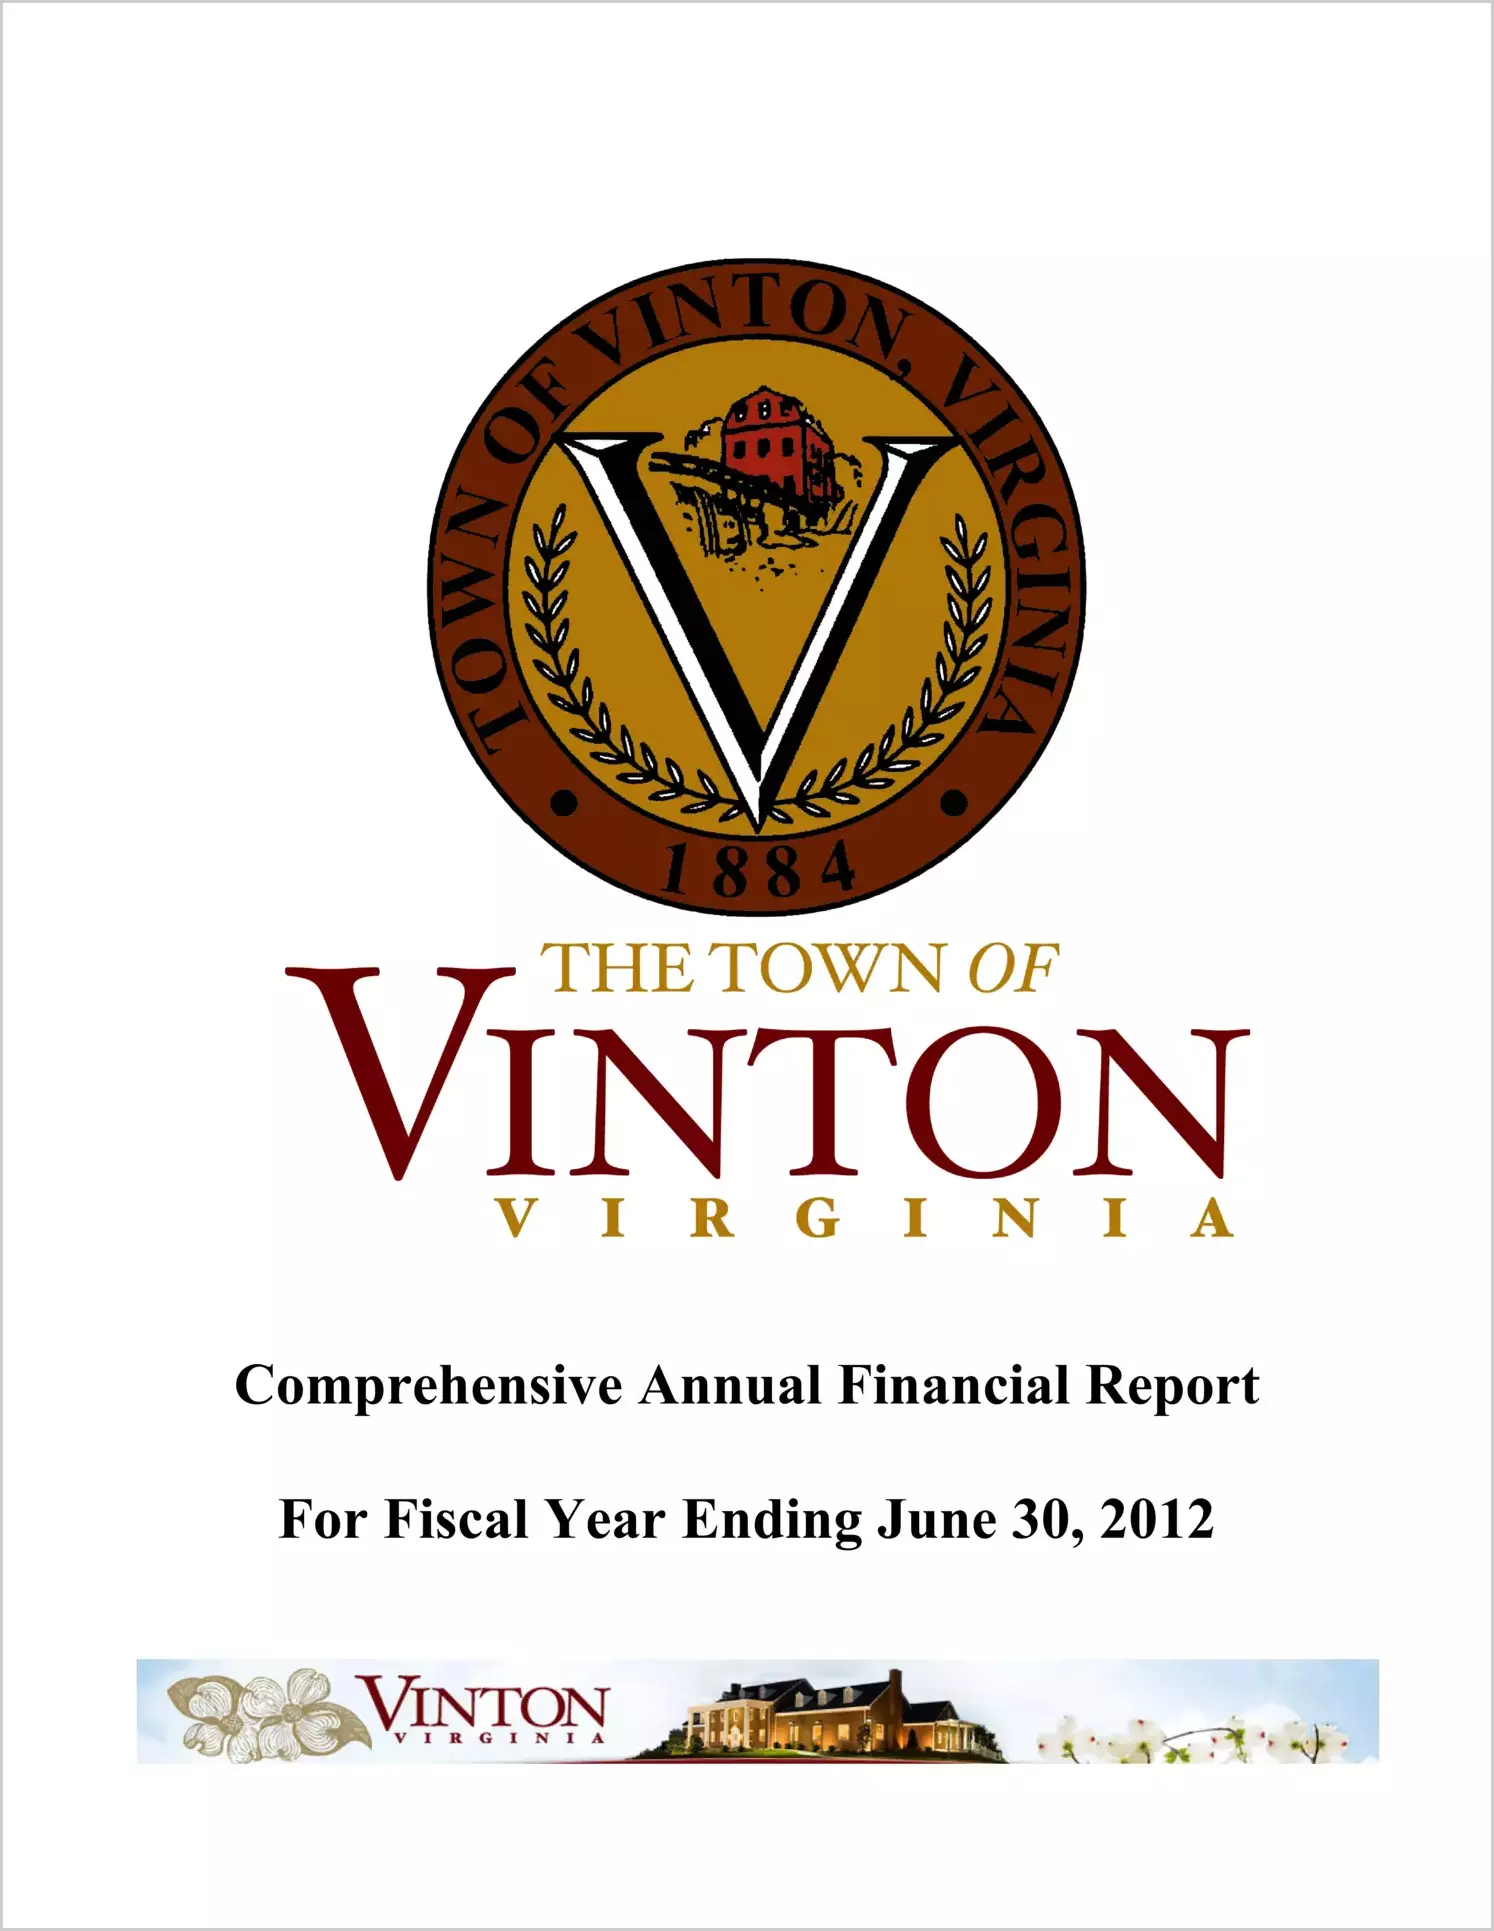 2012 Annual Financial Report for Town of Vinton